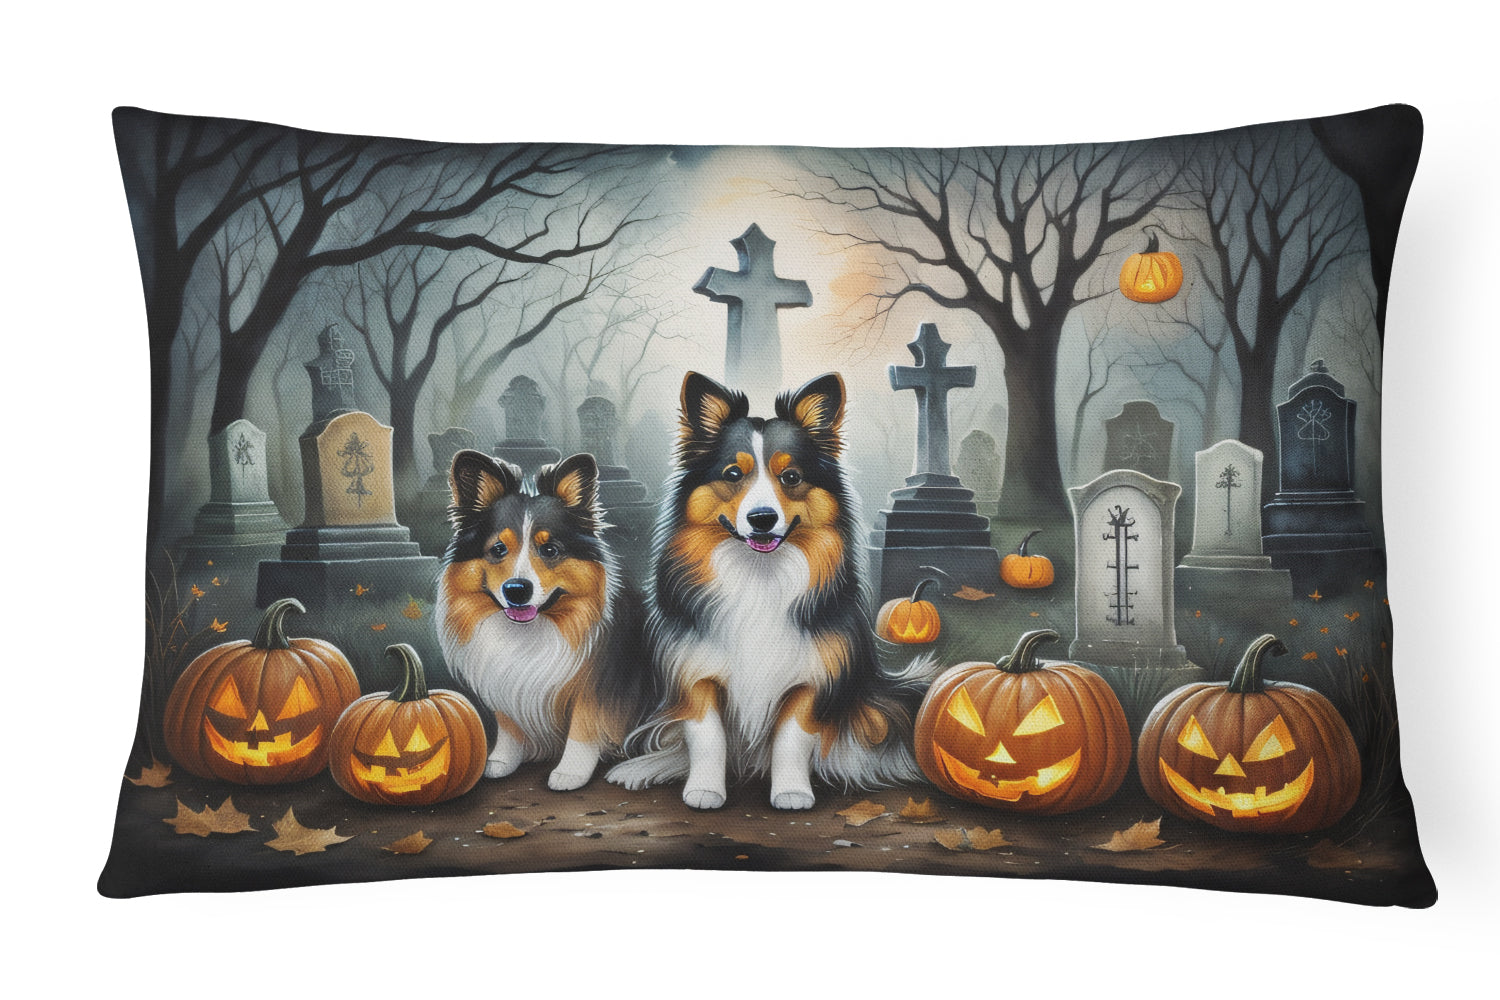 Buy this Sheltie Spooky Halloween Fabric Decorative Pillow